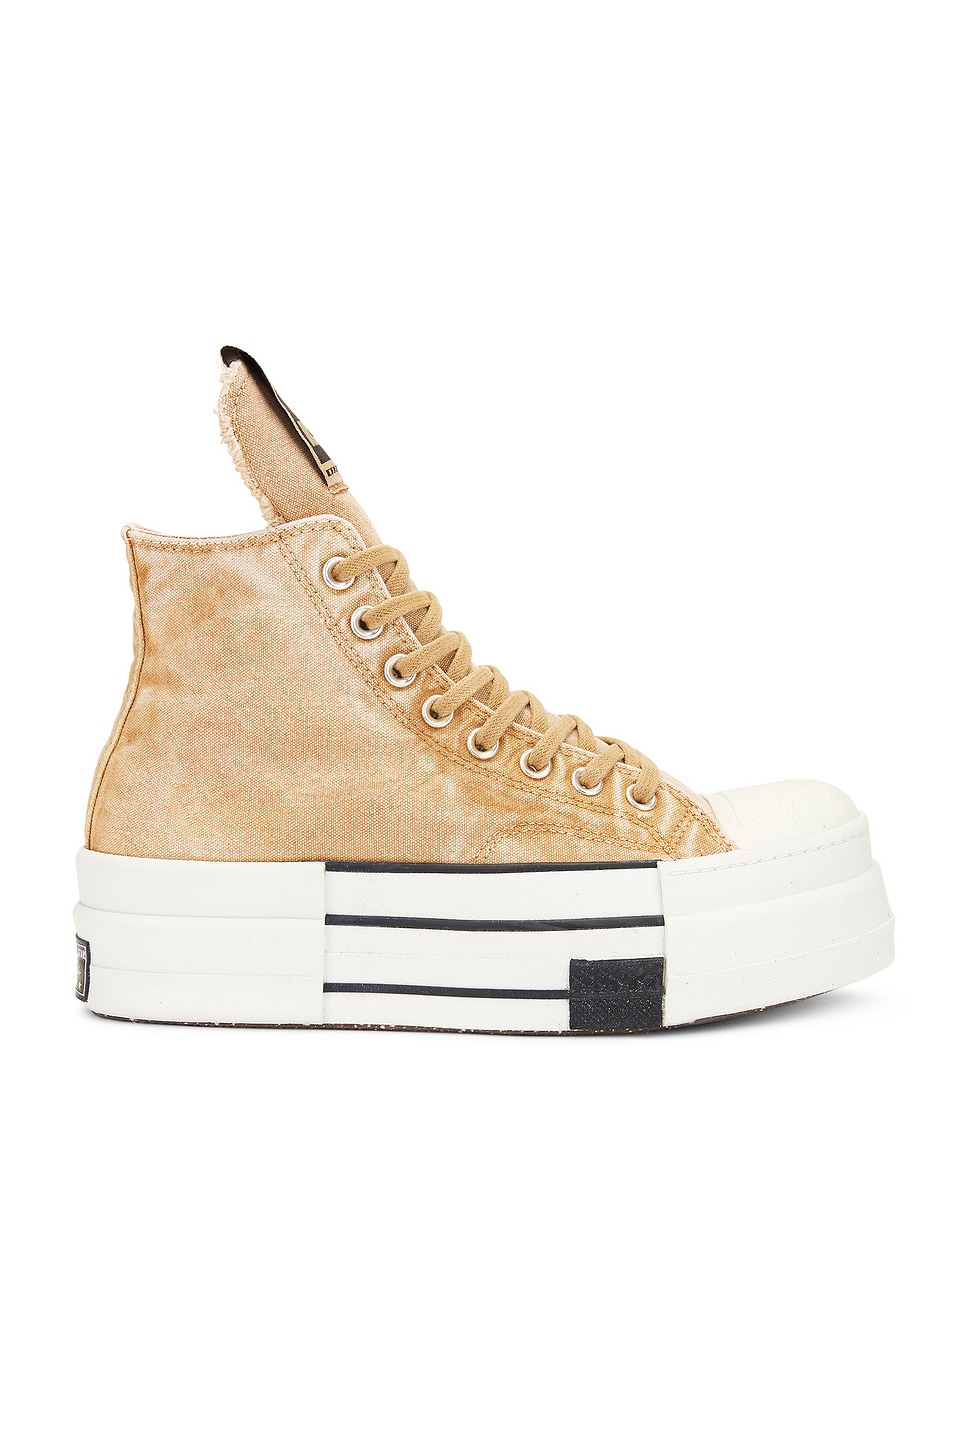 Image 1 of DRKSHDW by Rick Owens x Converse DBL Drkstar Hi Sneaker in Overdyed Blonde